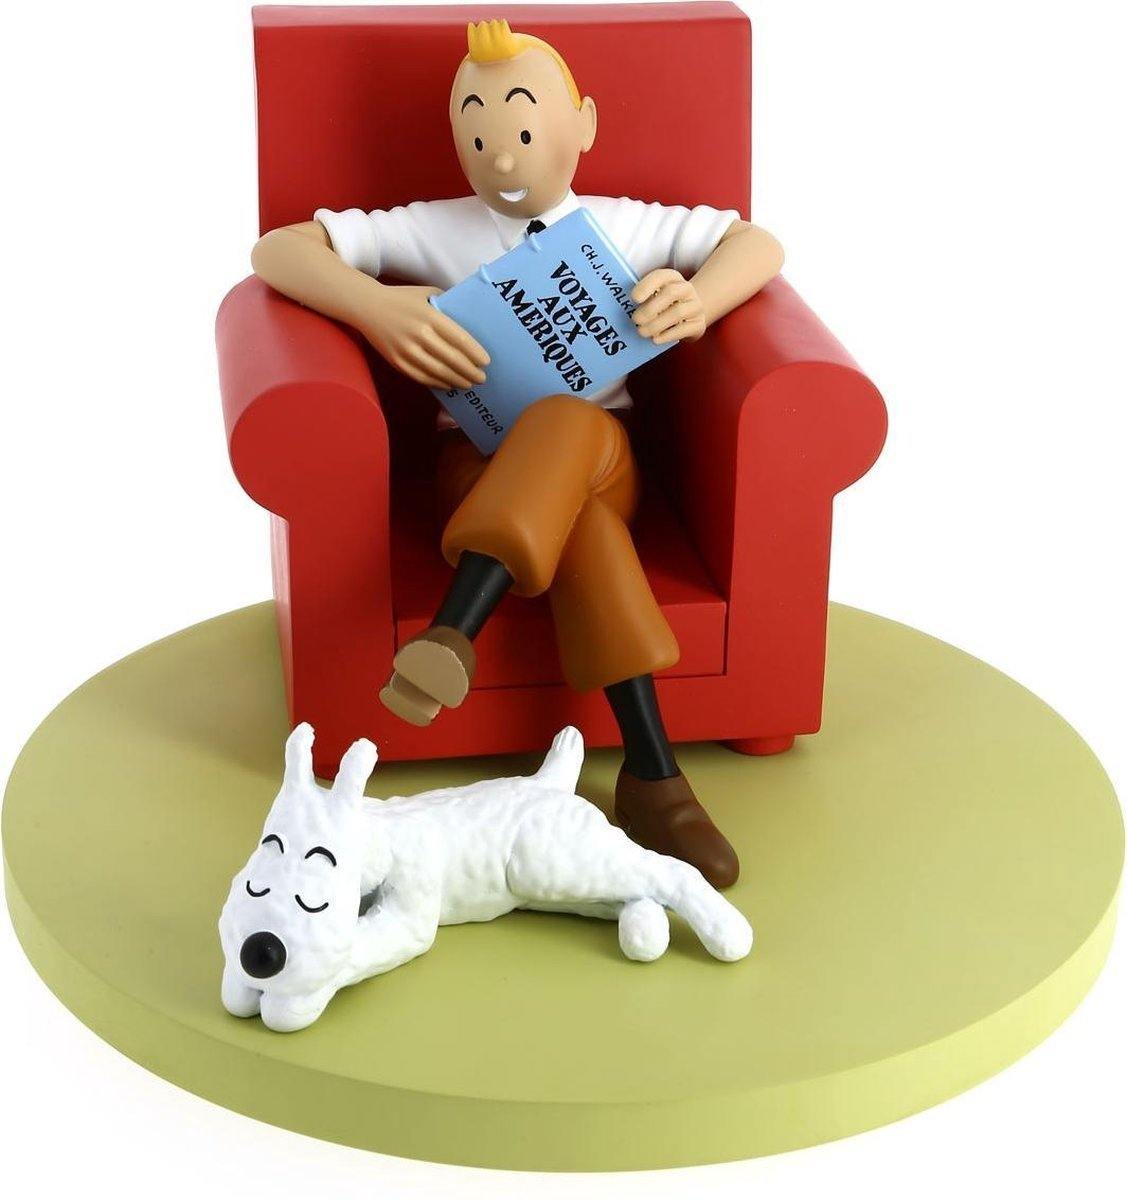 Tintin Statue The Red Sofa. Tintin sitting in his chair from the Icons Collection by Moulinsart. - chair, Chaise, Het gebroken oor, Kuifje, Moulinsart, red chair, stoel, The Broken Ear, Tintin, tintin statue - Gadgetz Home